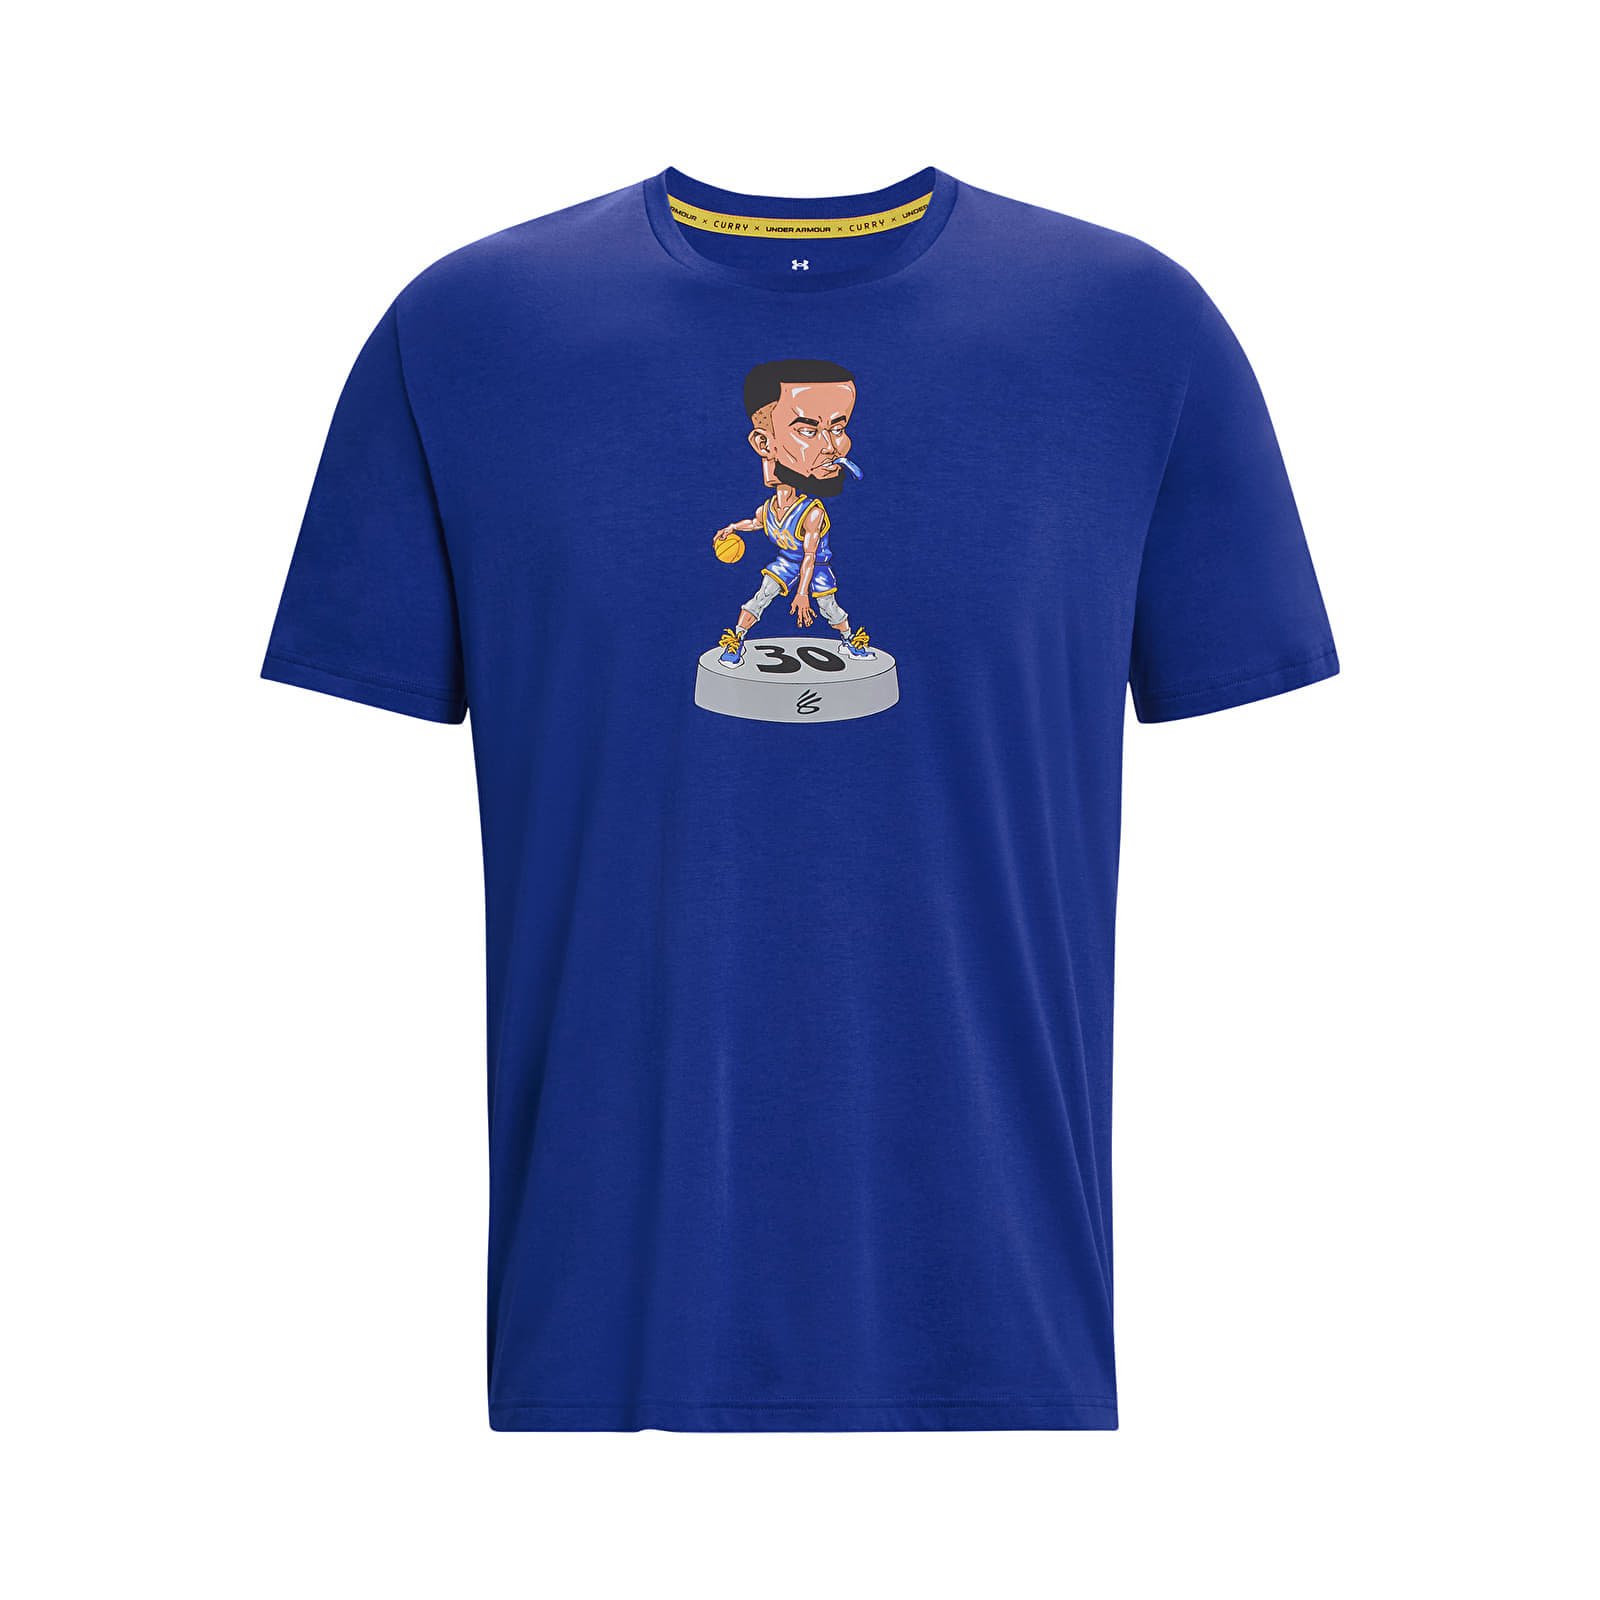 Curry Bobble Head Graphic T-Shirt